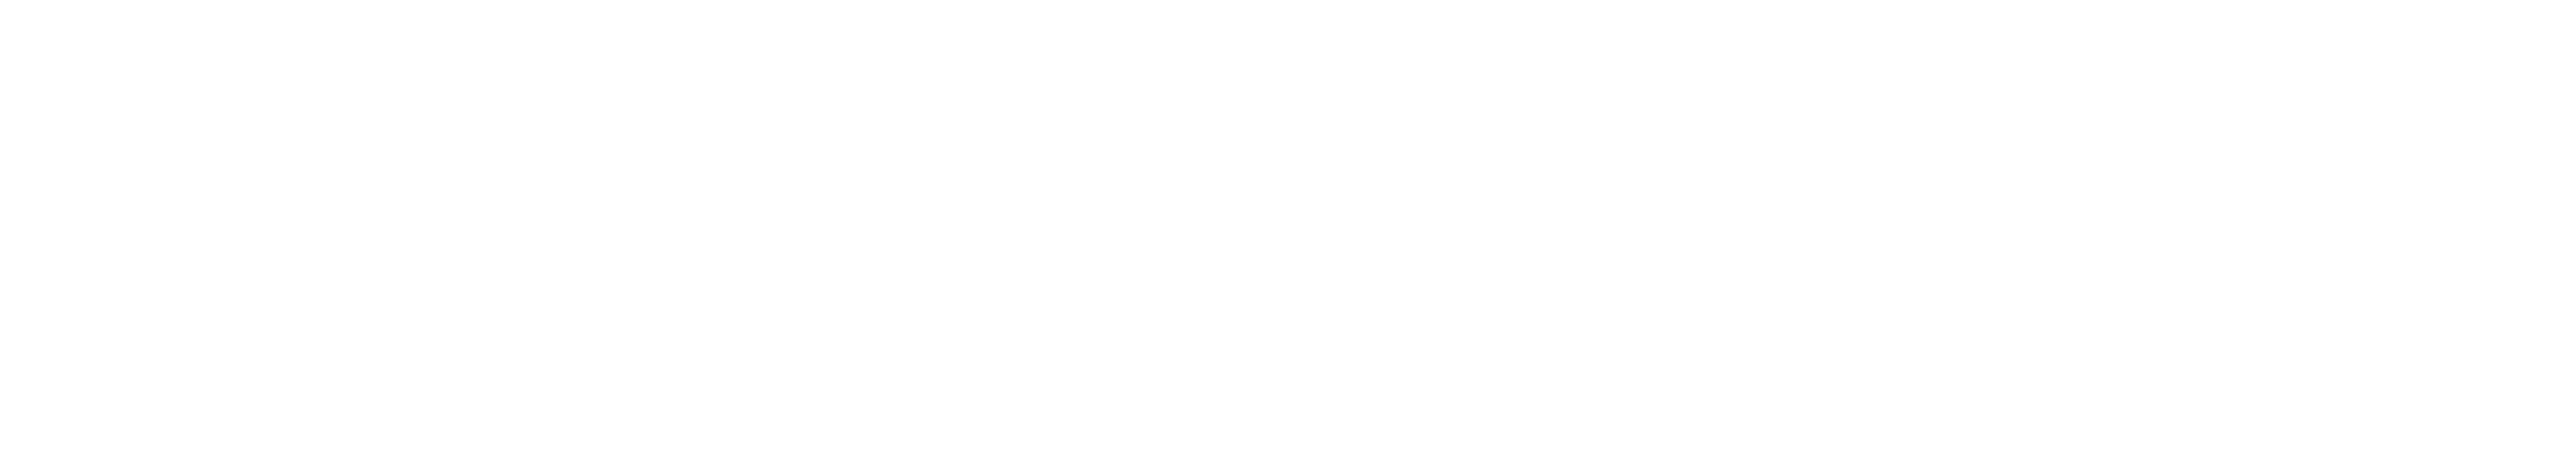 Star Wars Logo Icon #318654 - Free Icons Library